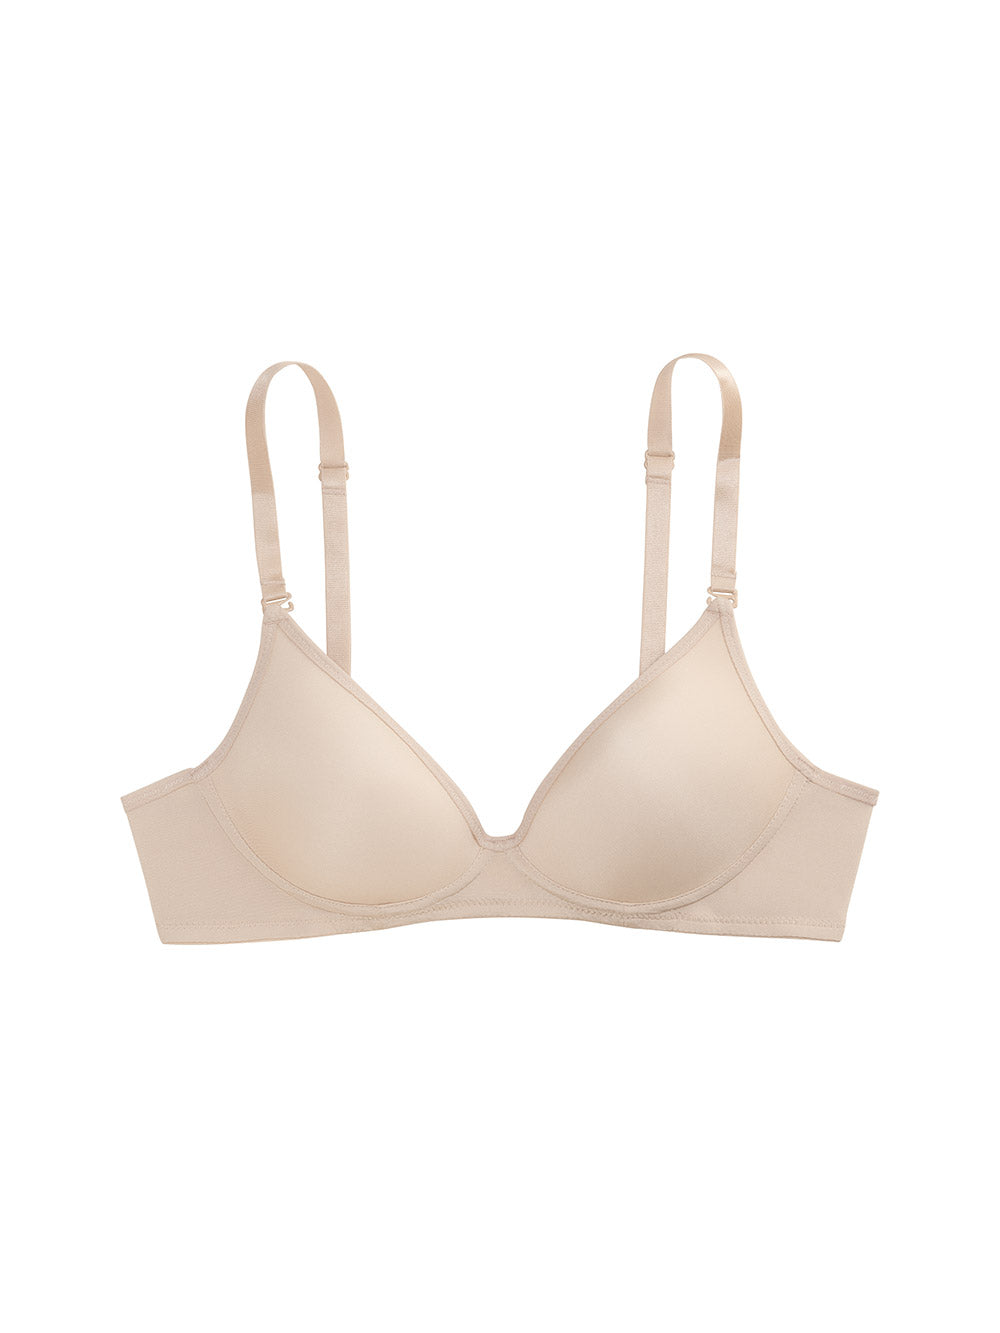 Lea Lace, Light Push-Up, Wire-free, Extra Support, Smooth Silhouette